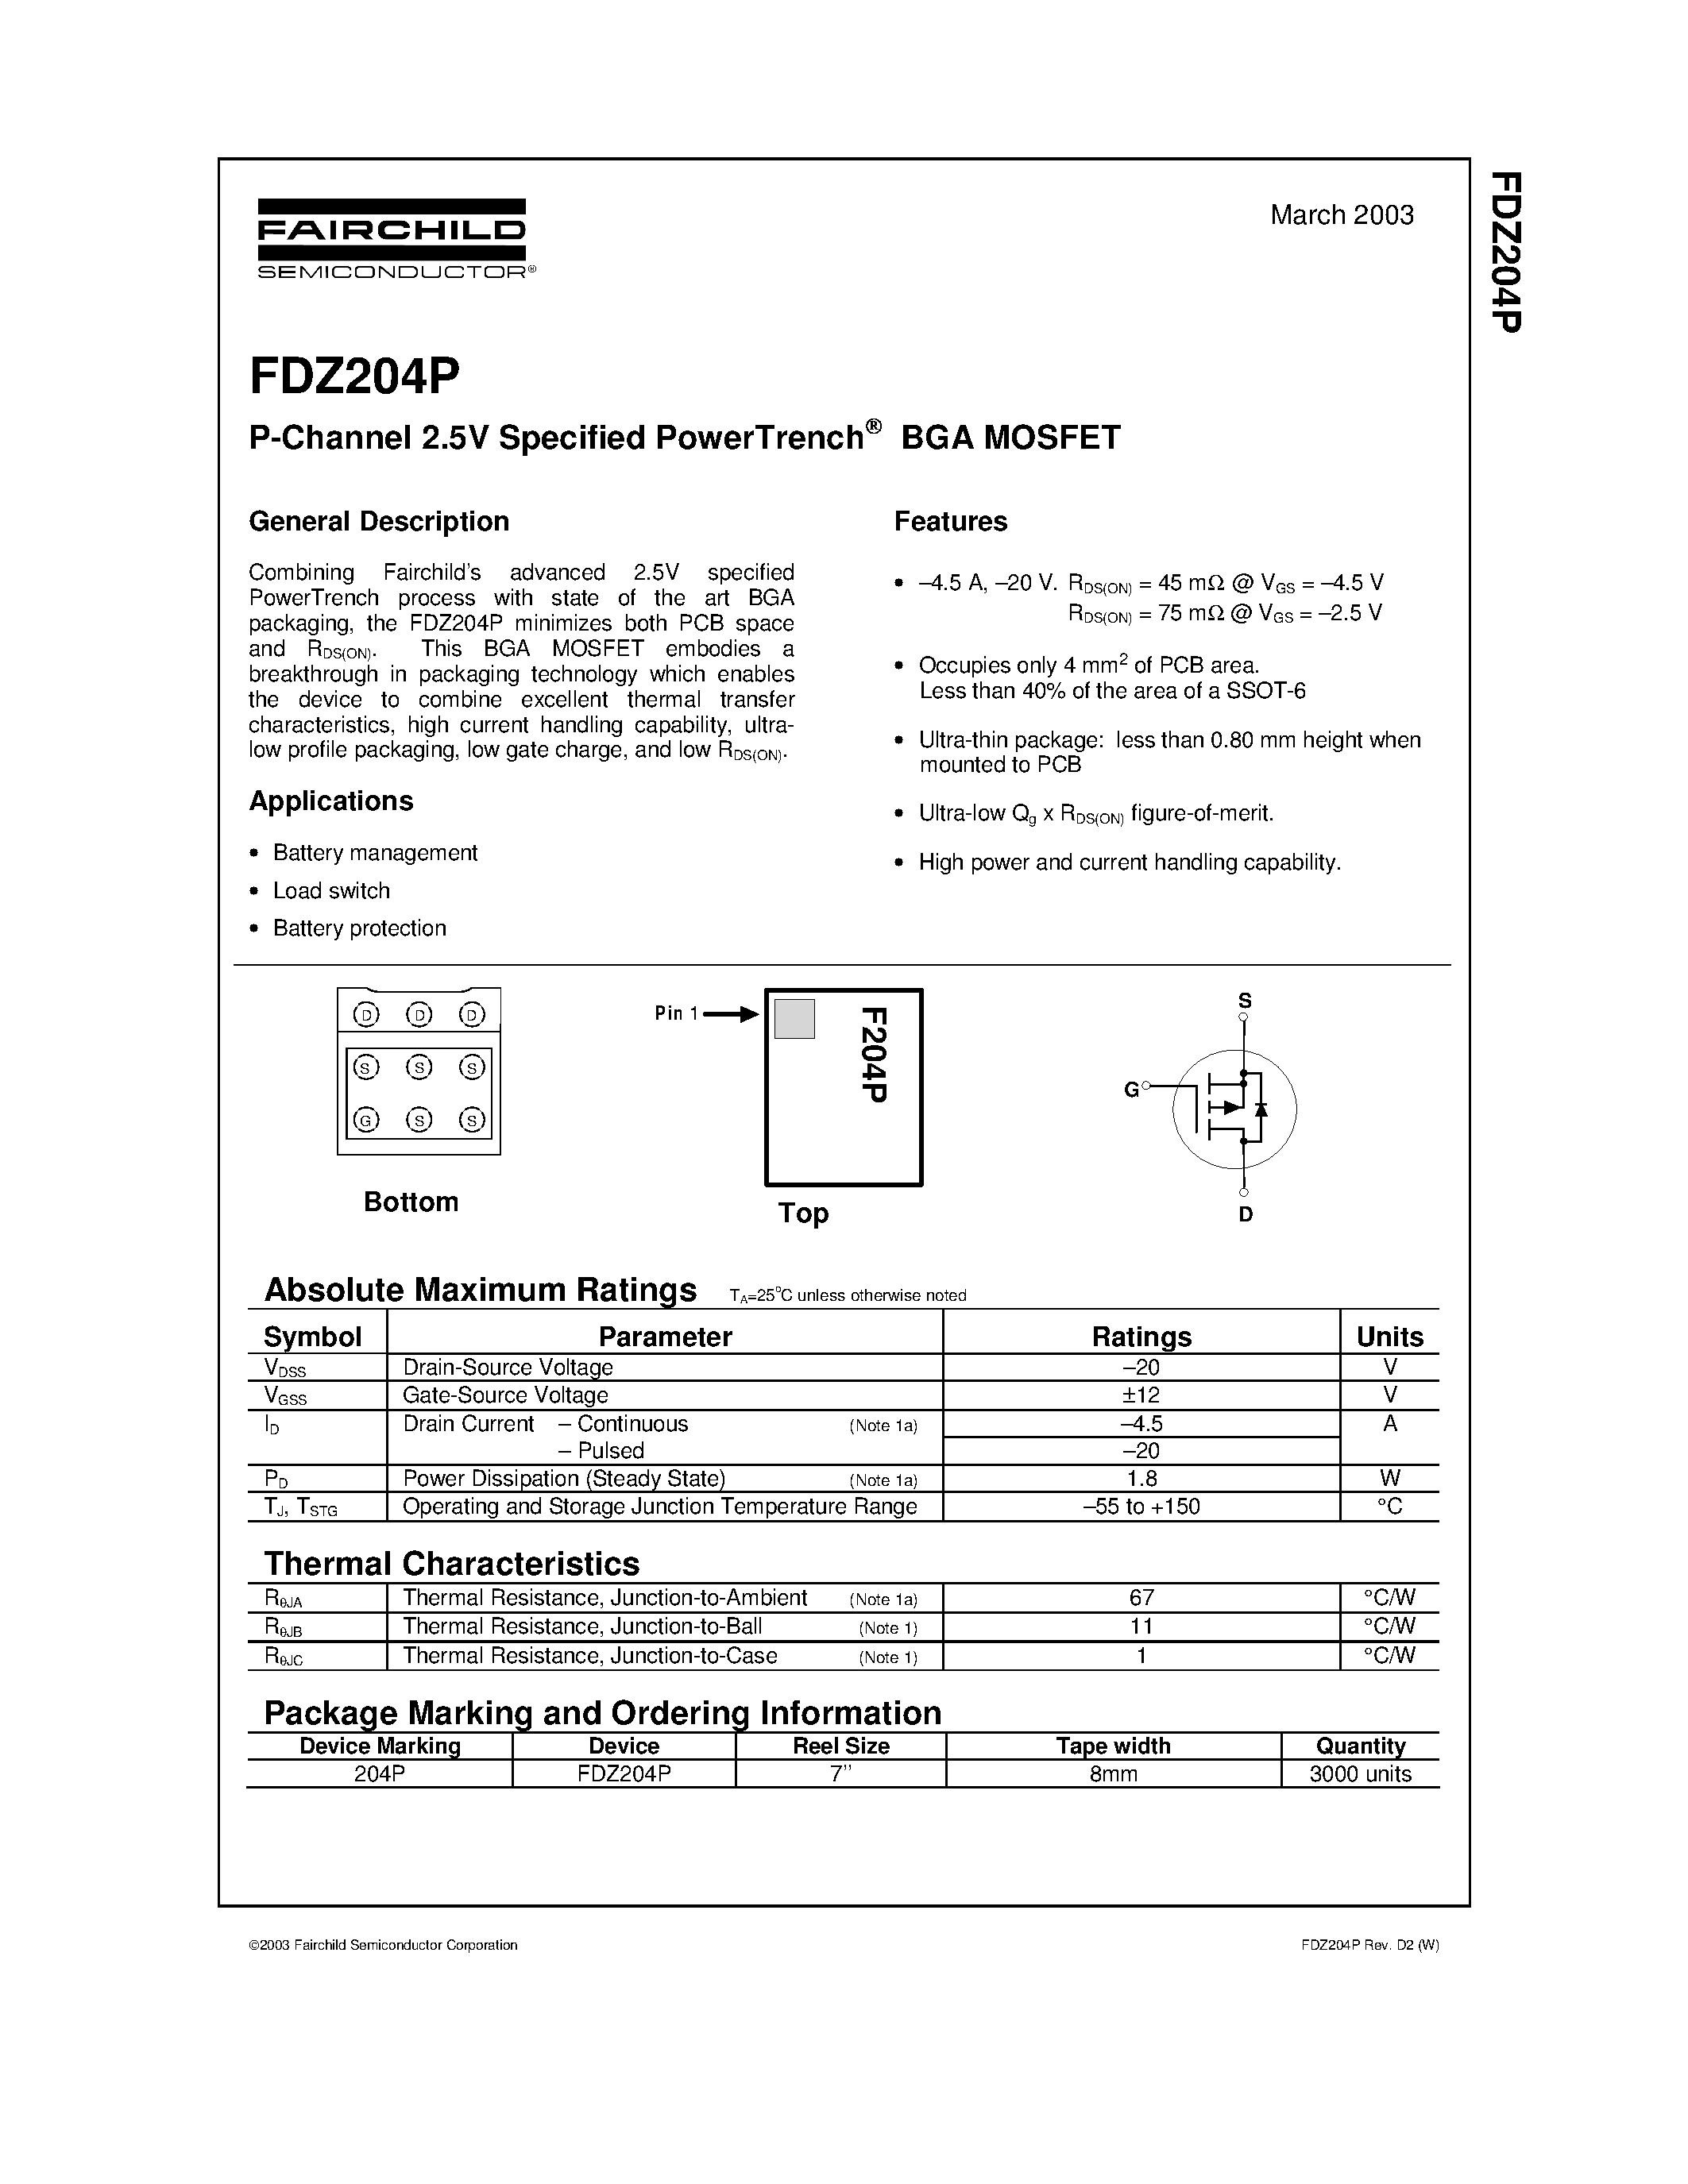 Datasheet FDZ204P - P-Channel 2.5V Specified PowerTrench page 1